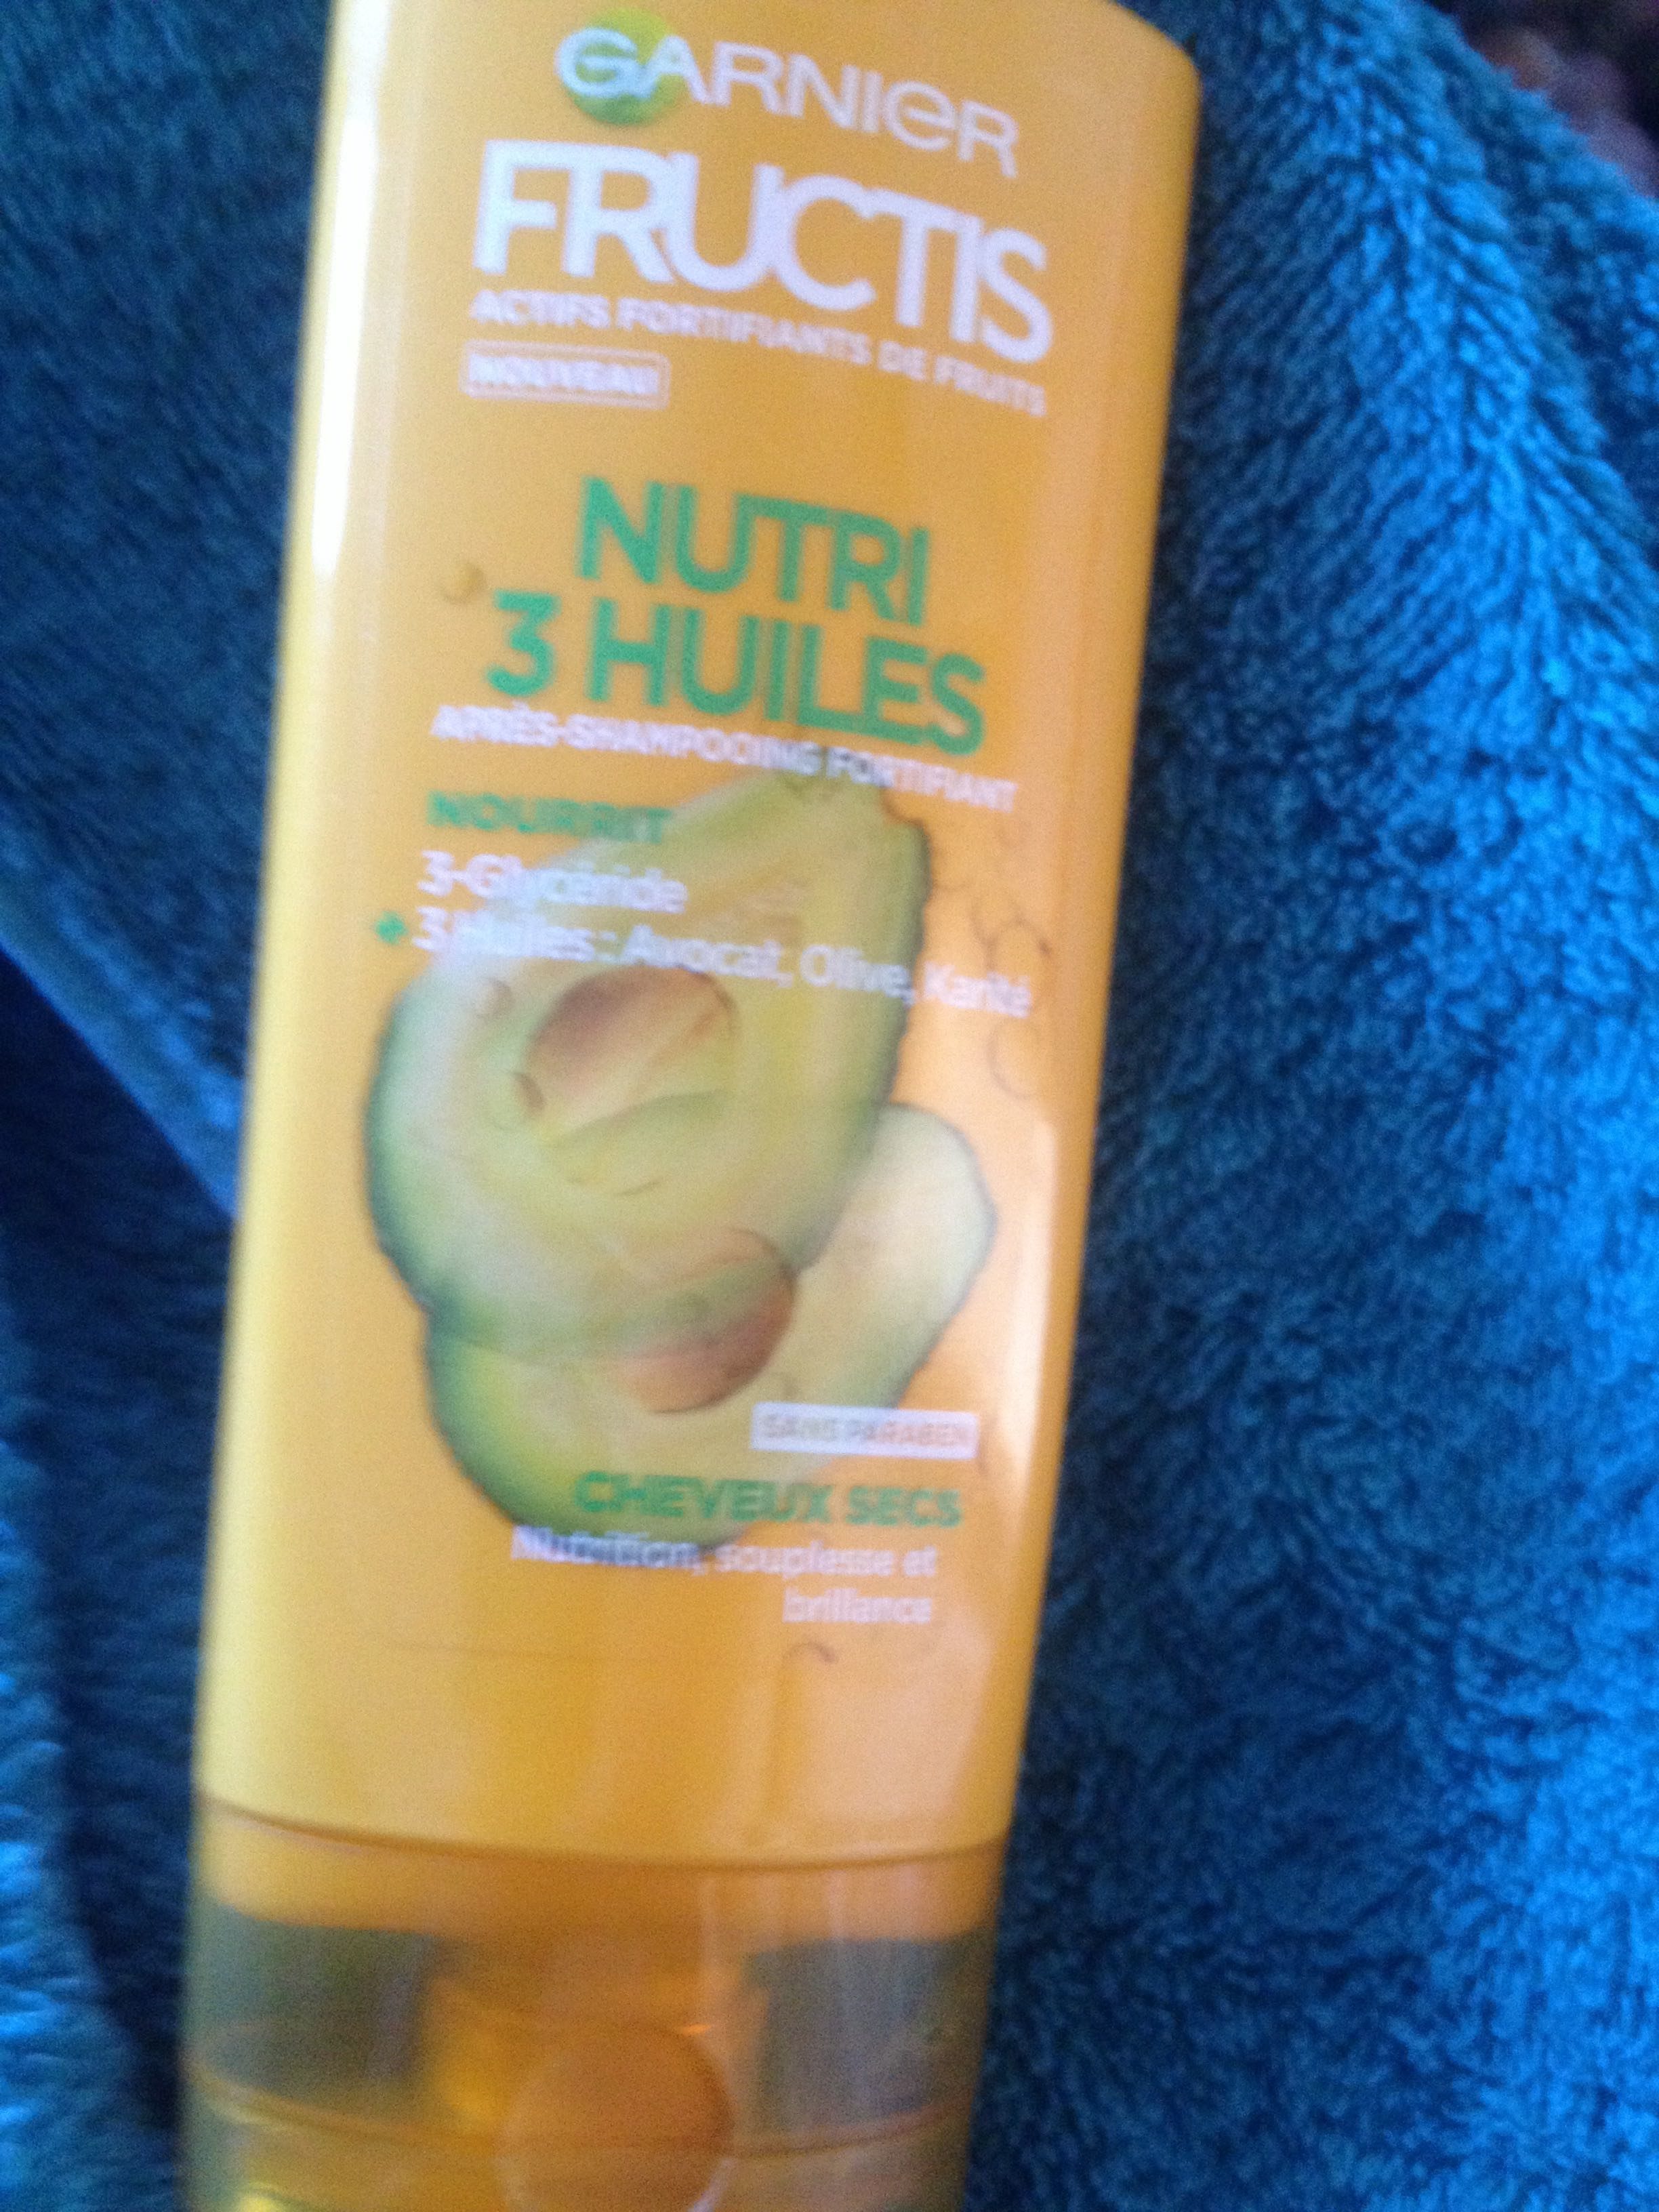 Nutri 3 Huiles - Product - fr